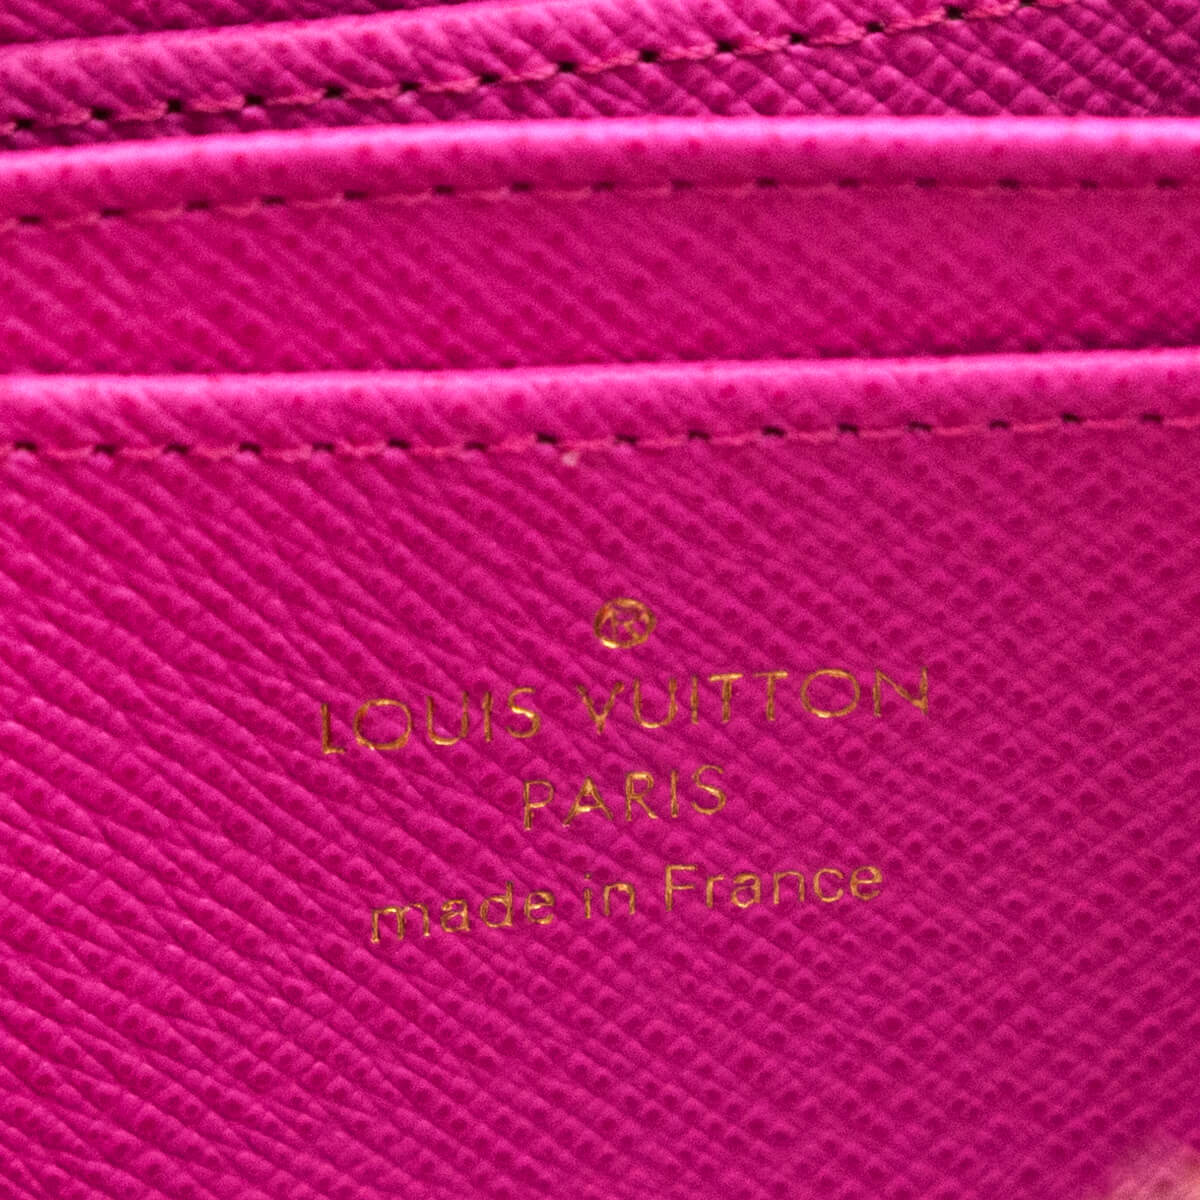 Louis Vuitton Midnight & Fuchsia Monogram Giant Spring In The City Zippy Coin Purse - Love that Bag etc - Preowned Authentic Designer Handbags & Preloved Fashions